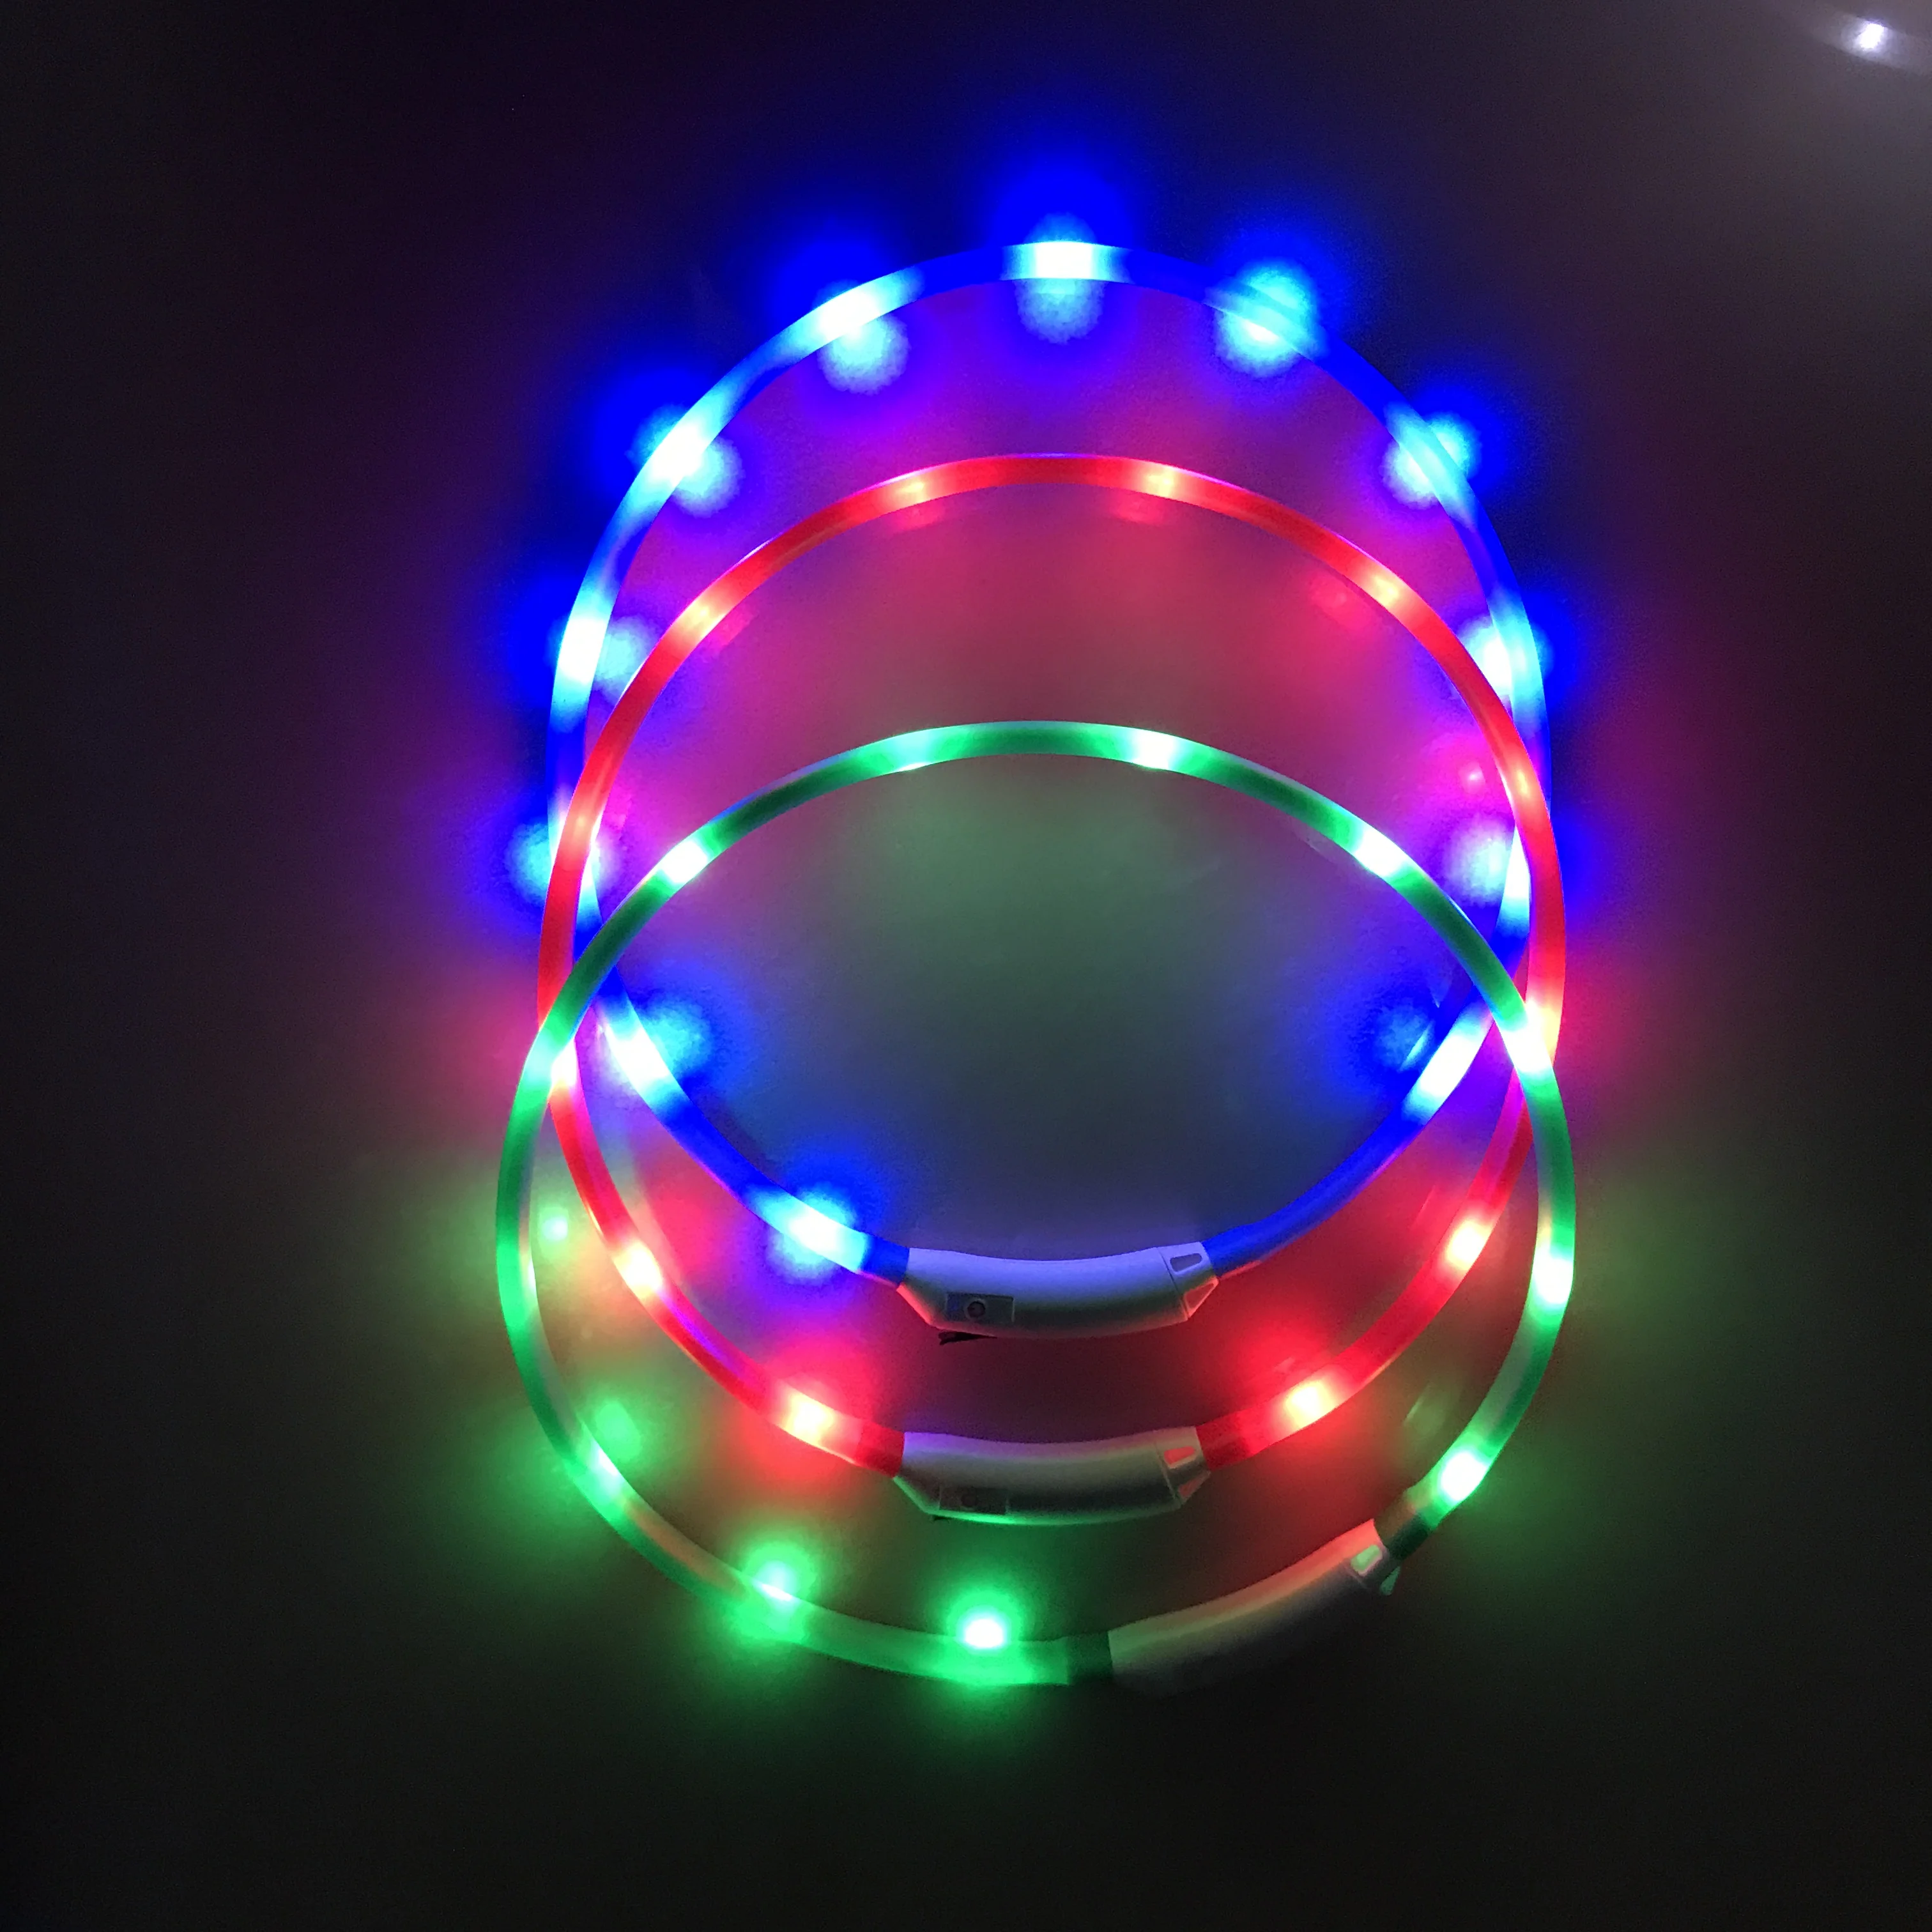 

Newest USB Rechargeable Led Dog Pet Flashing Collar Light Up Chargeable Night Safety Necklace Free Size Colors